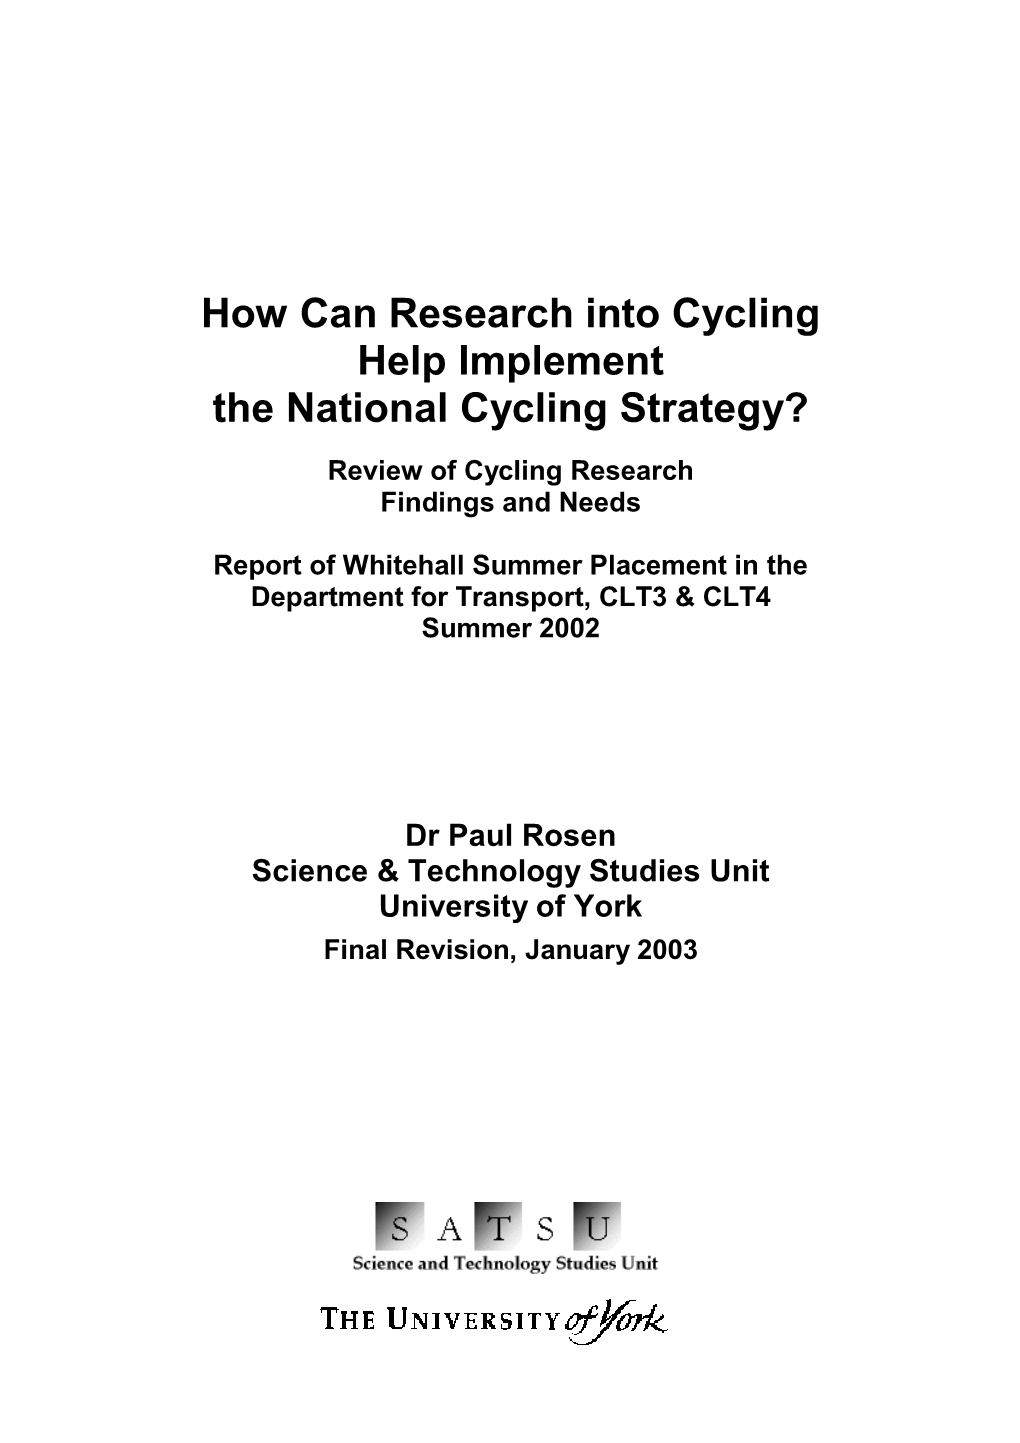 How Can Research Into Cycling Help Implement the National Cycling Strategy?